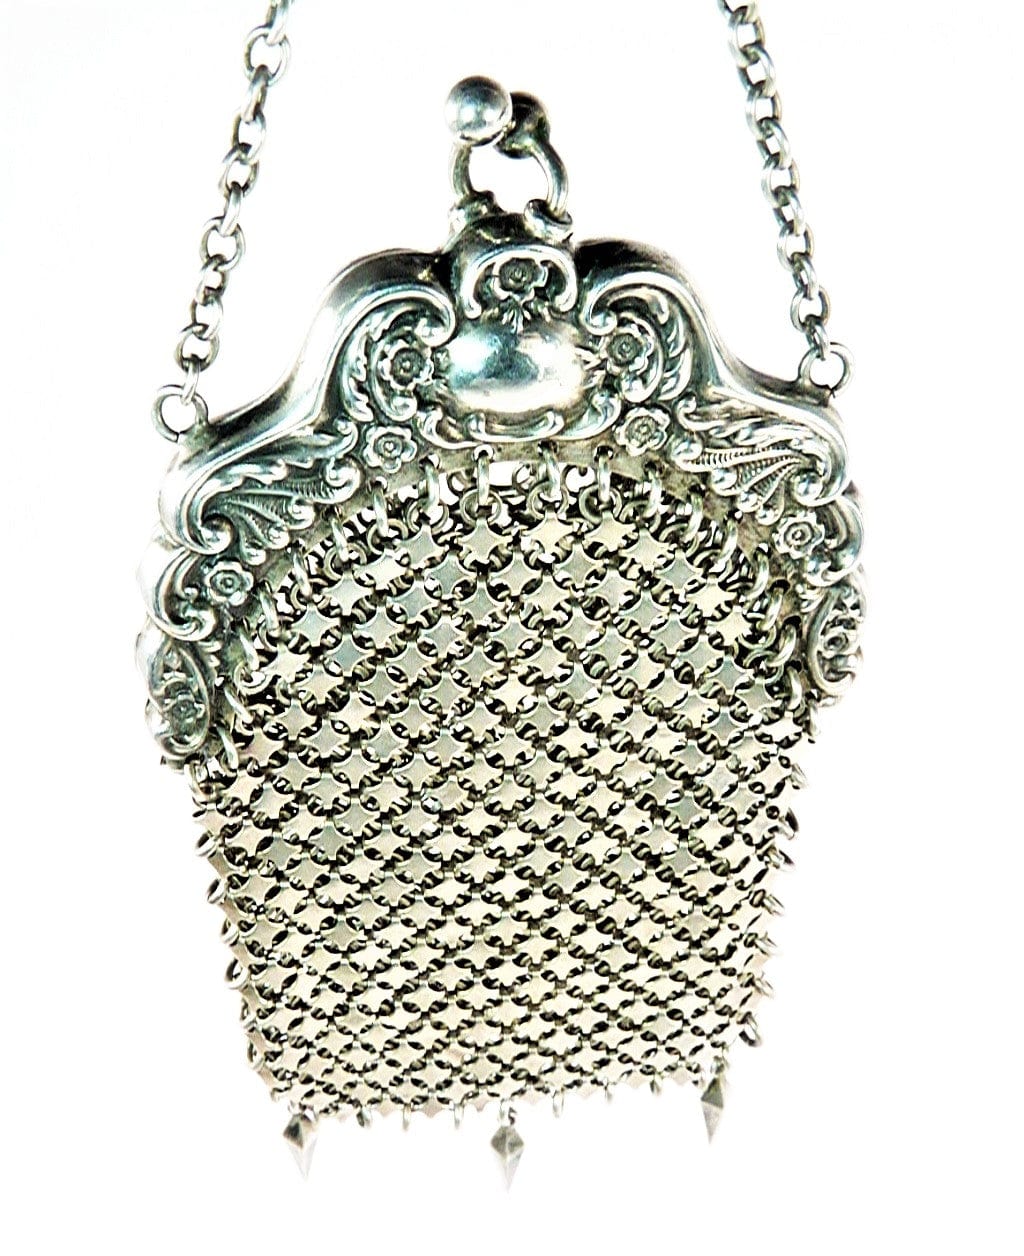 Buy Decorative Antique Silver Plated Evening Purse Online in India - Etsy